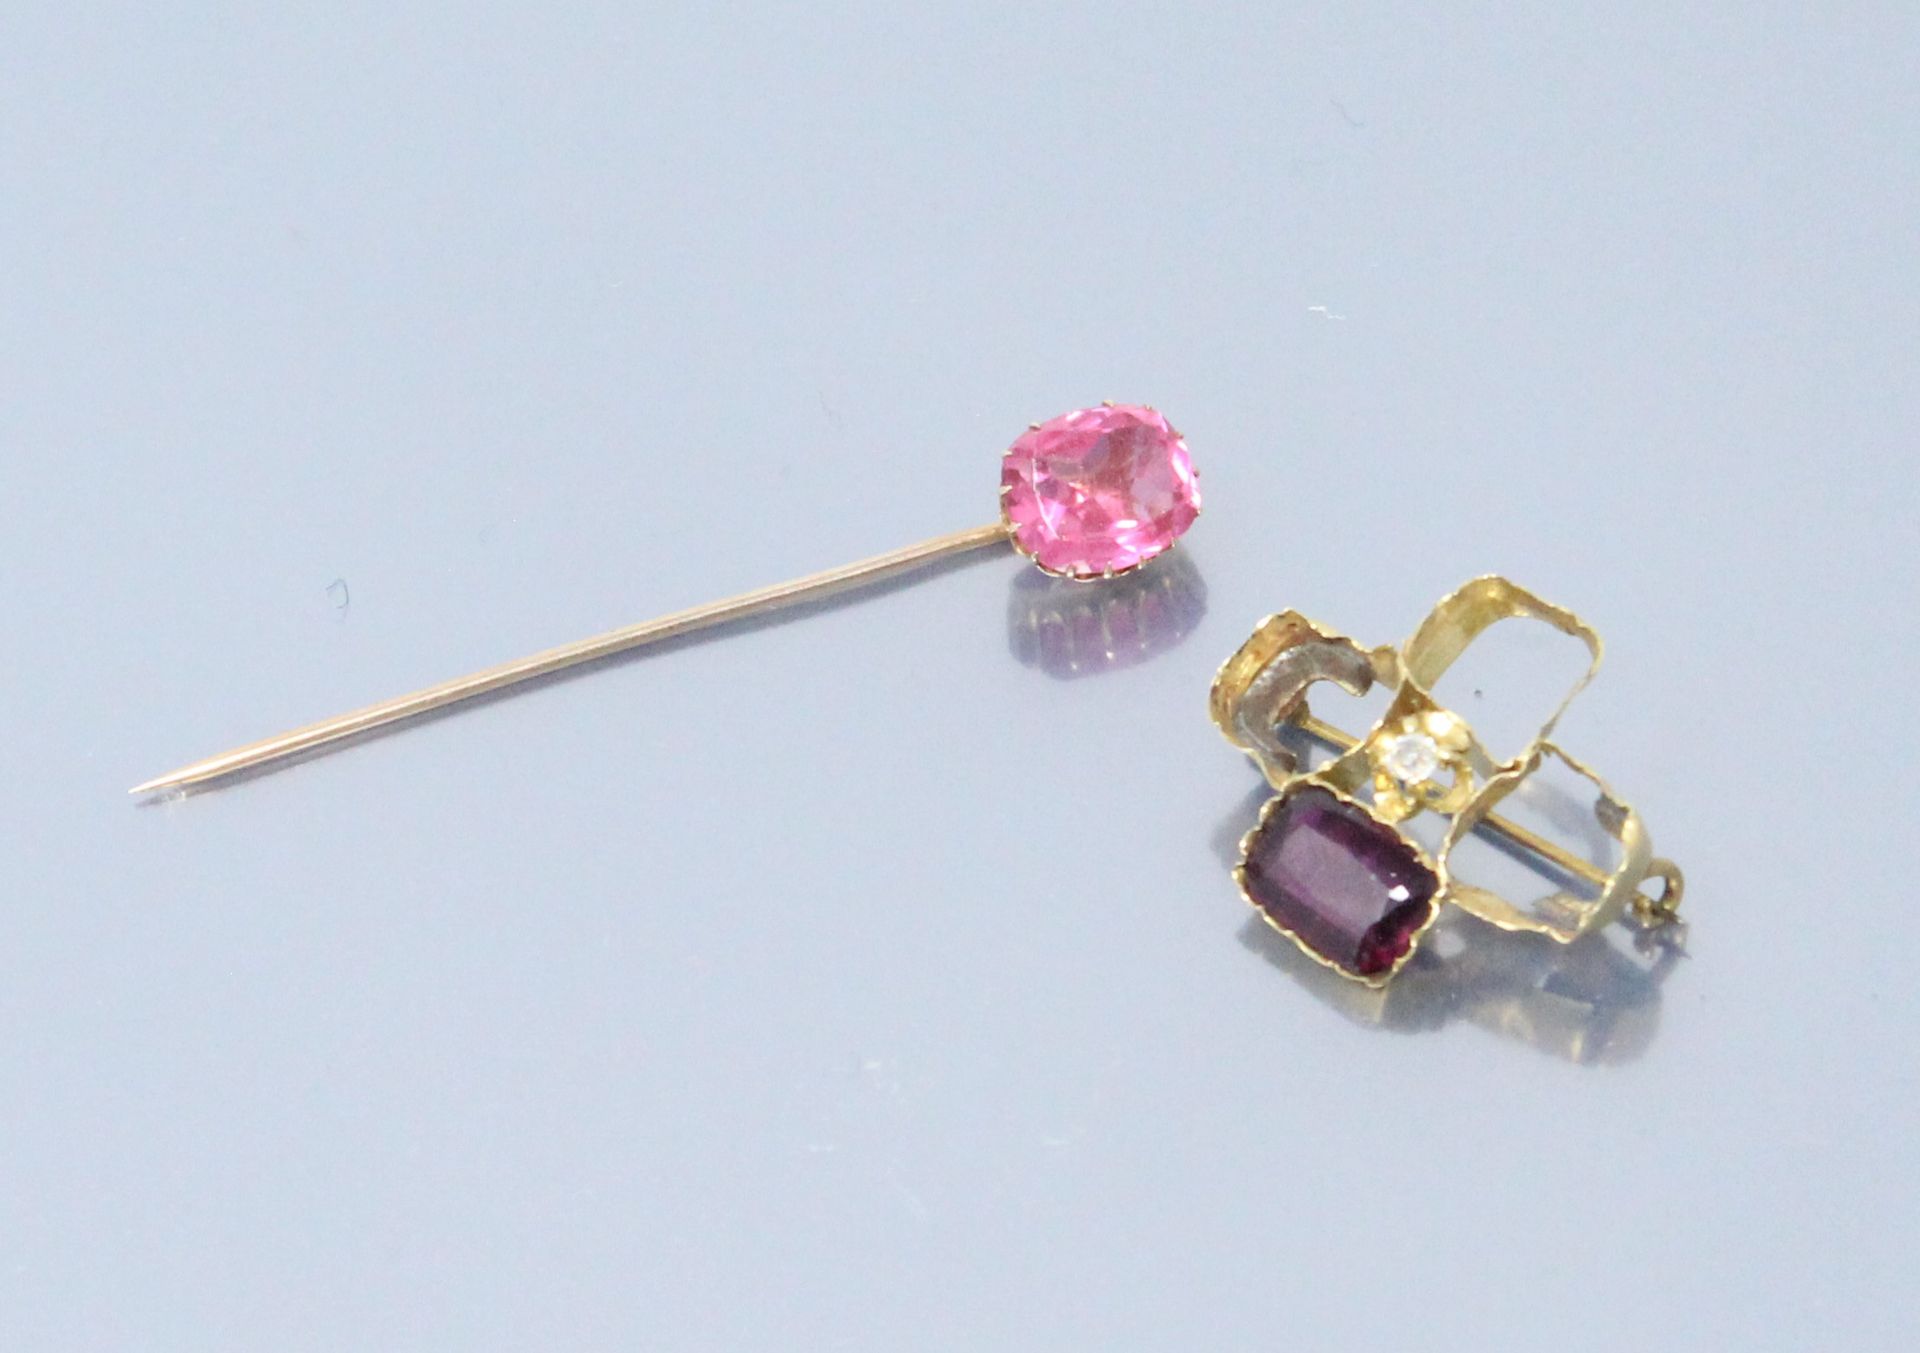 Null 18k (750) yellow gold pin set with a pink stone. 

An 18k (750) yellow gold&hellip;